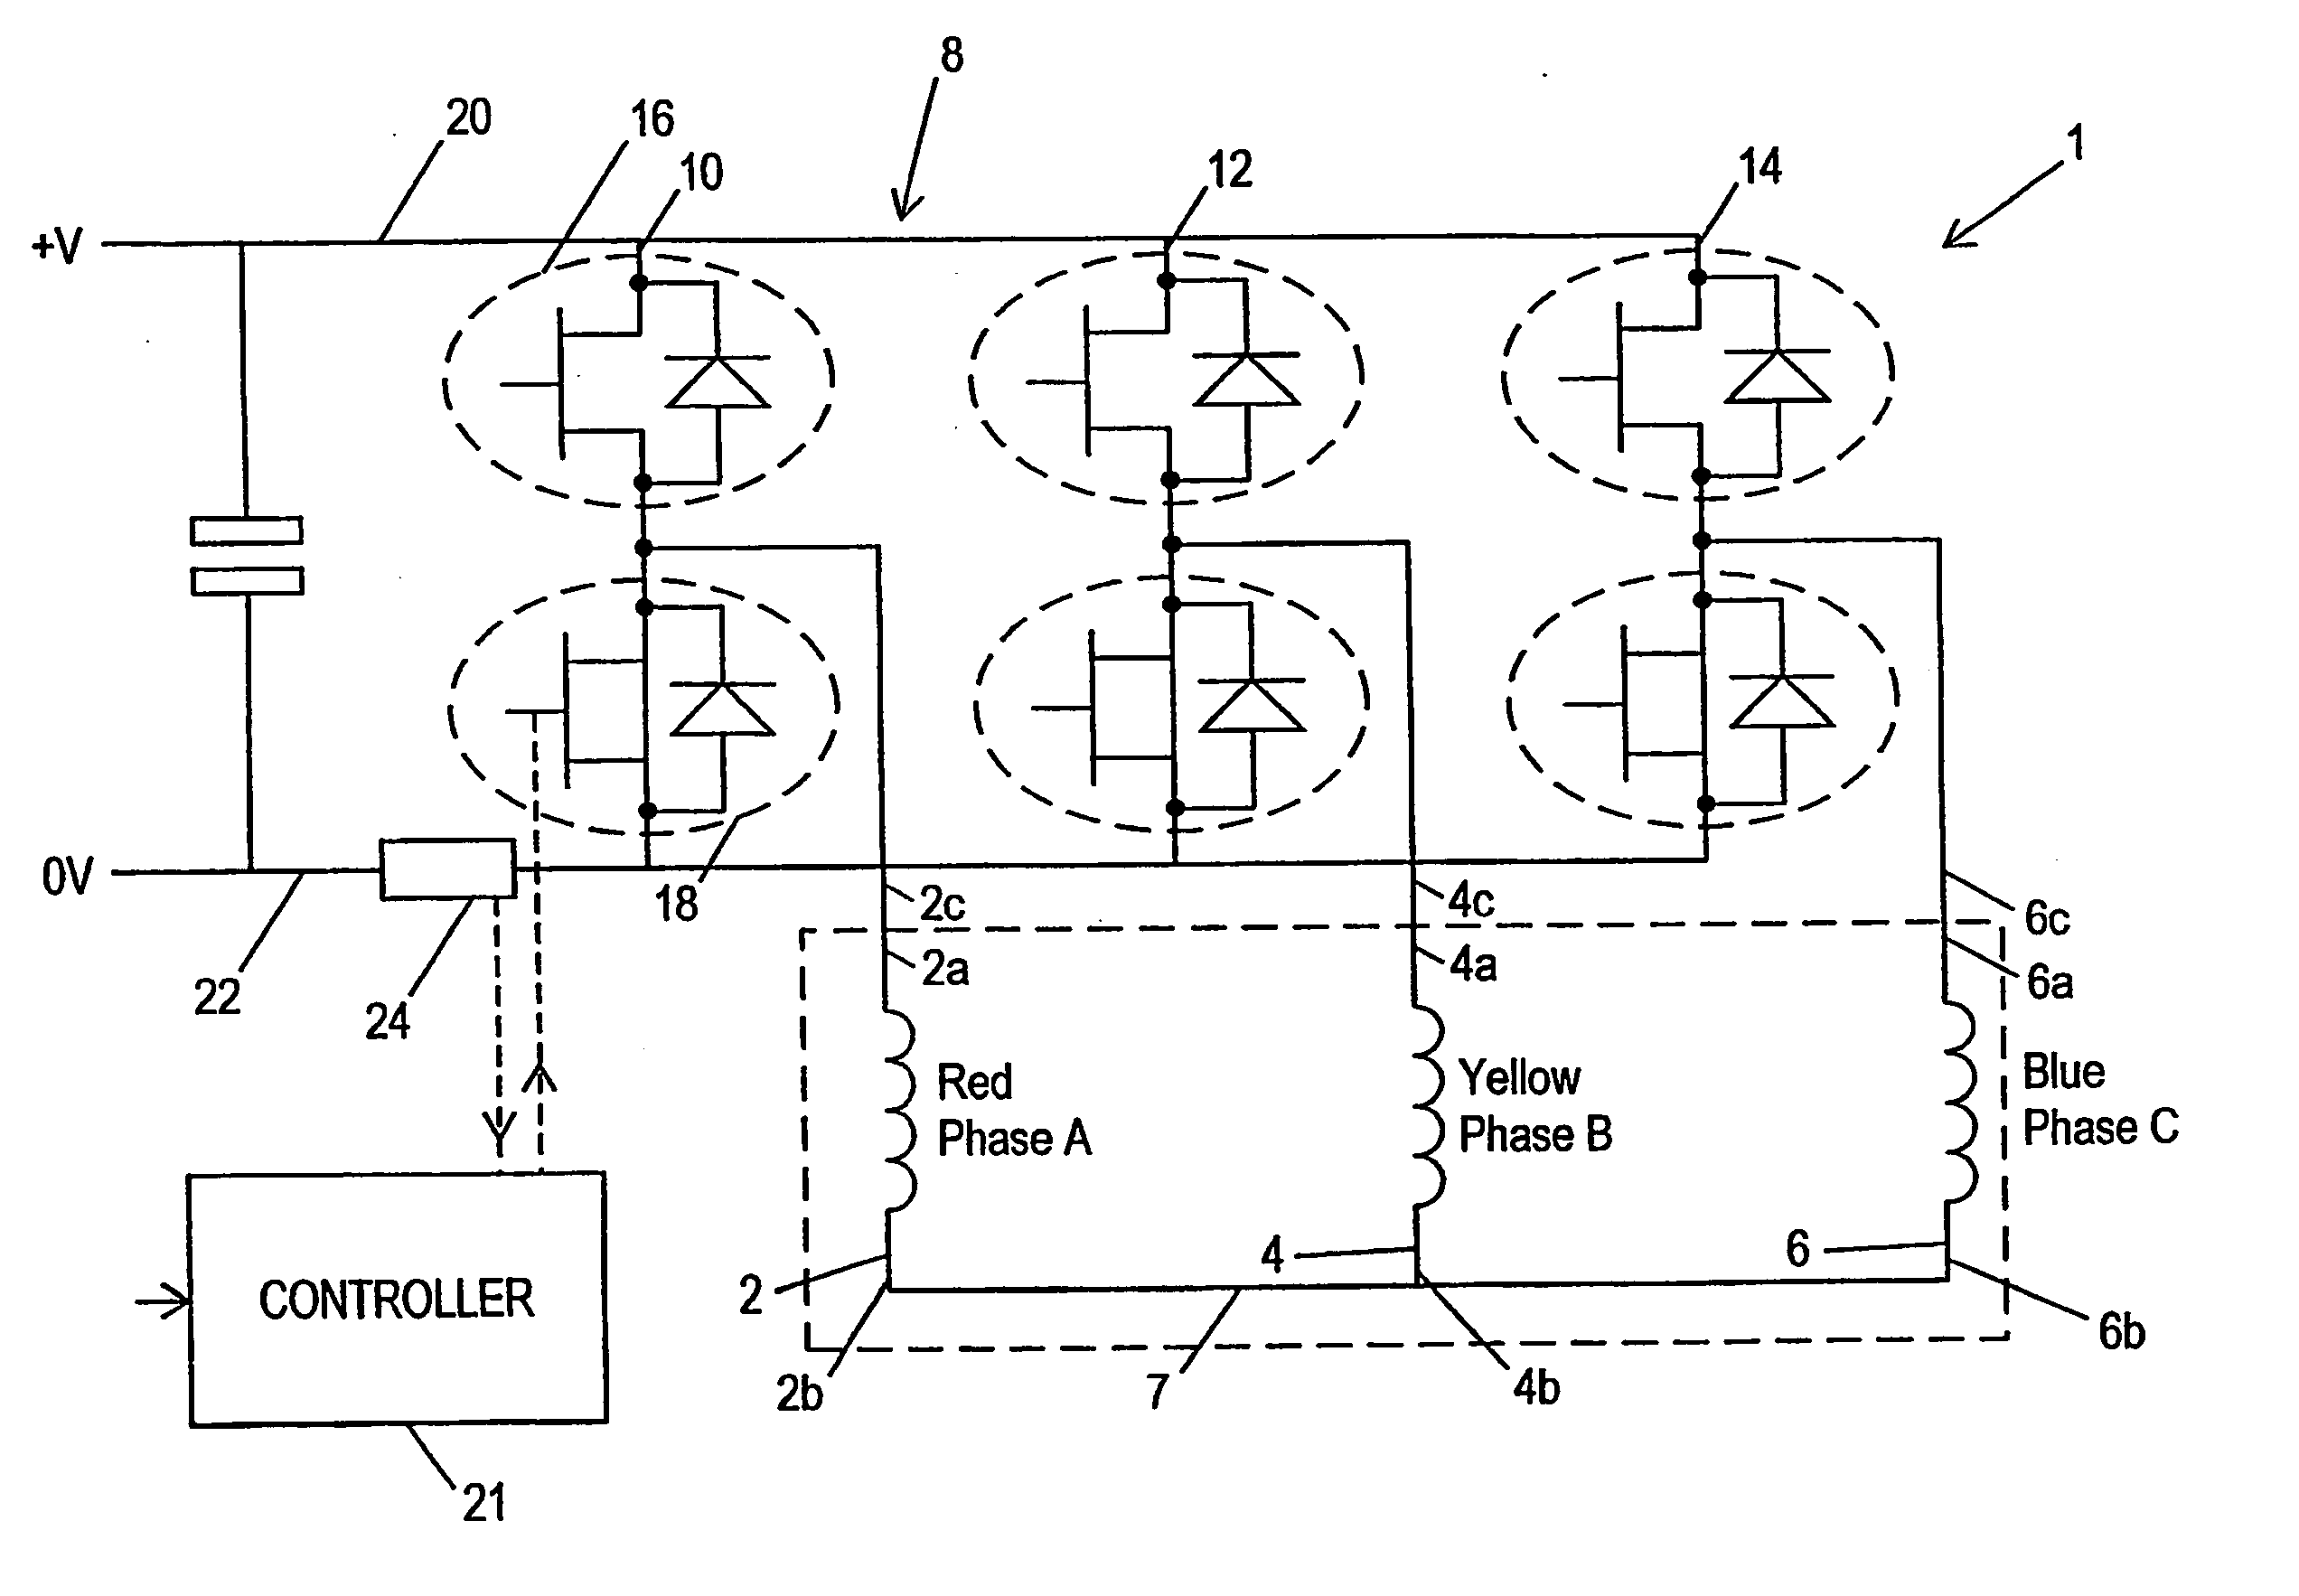 Motor drive control with a single current sensor using space vector technique